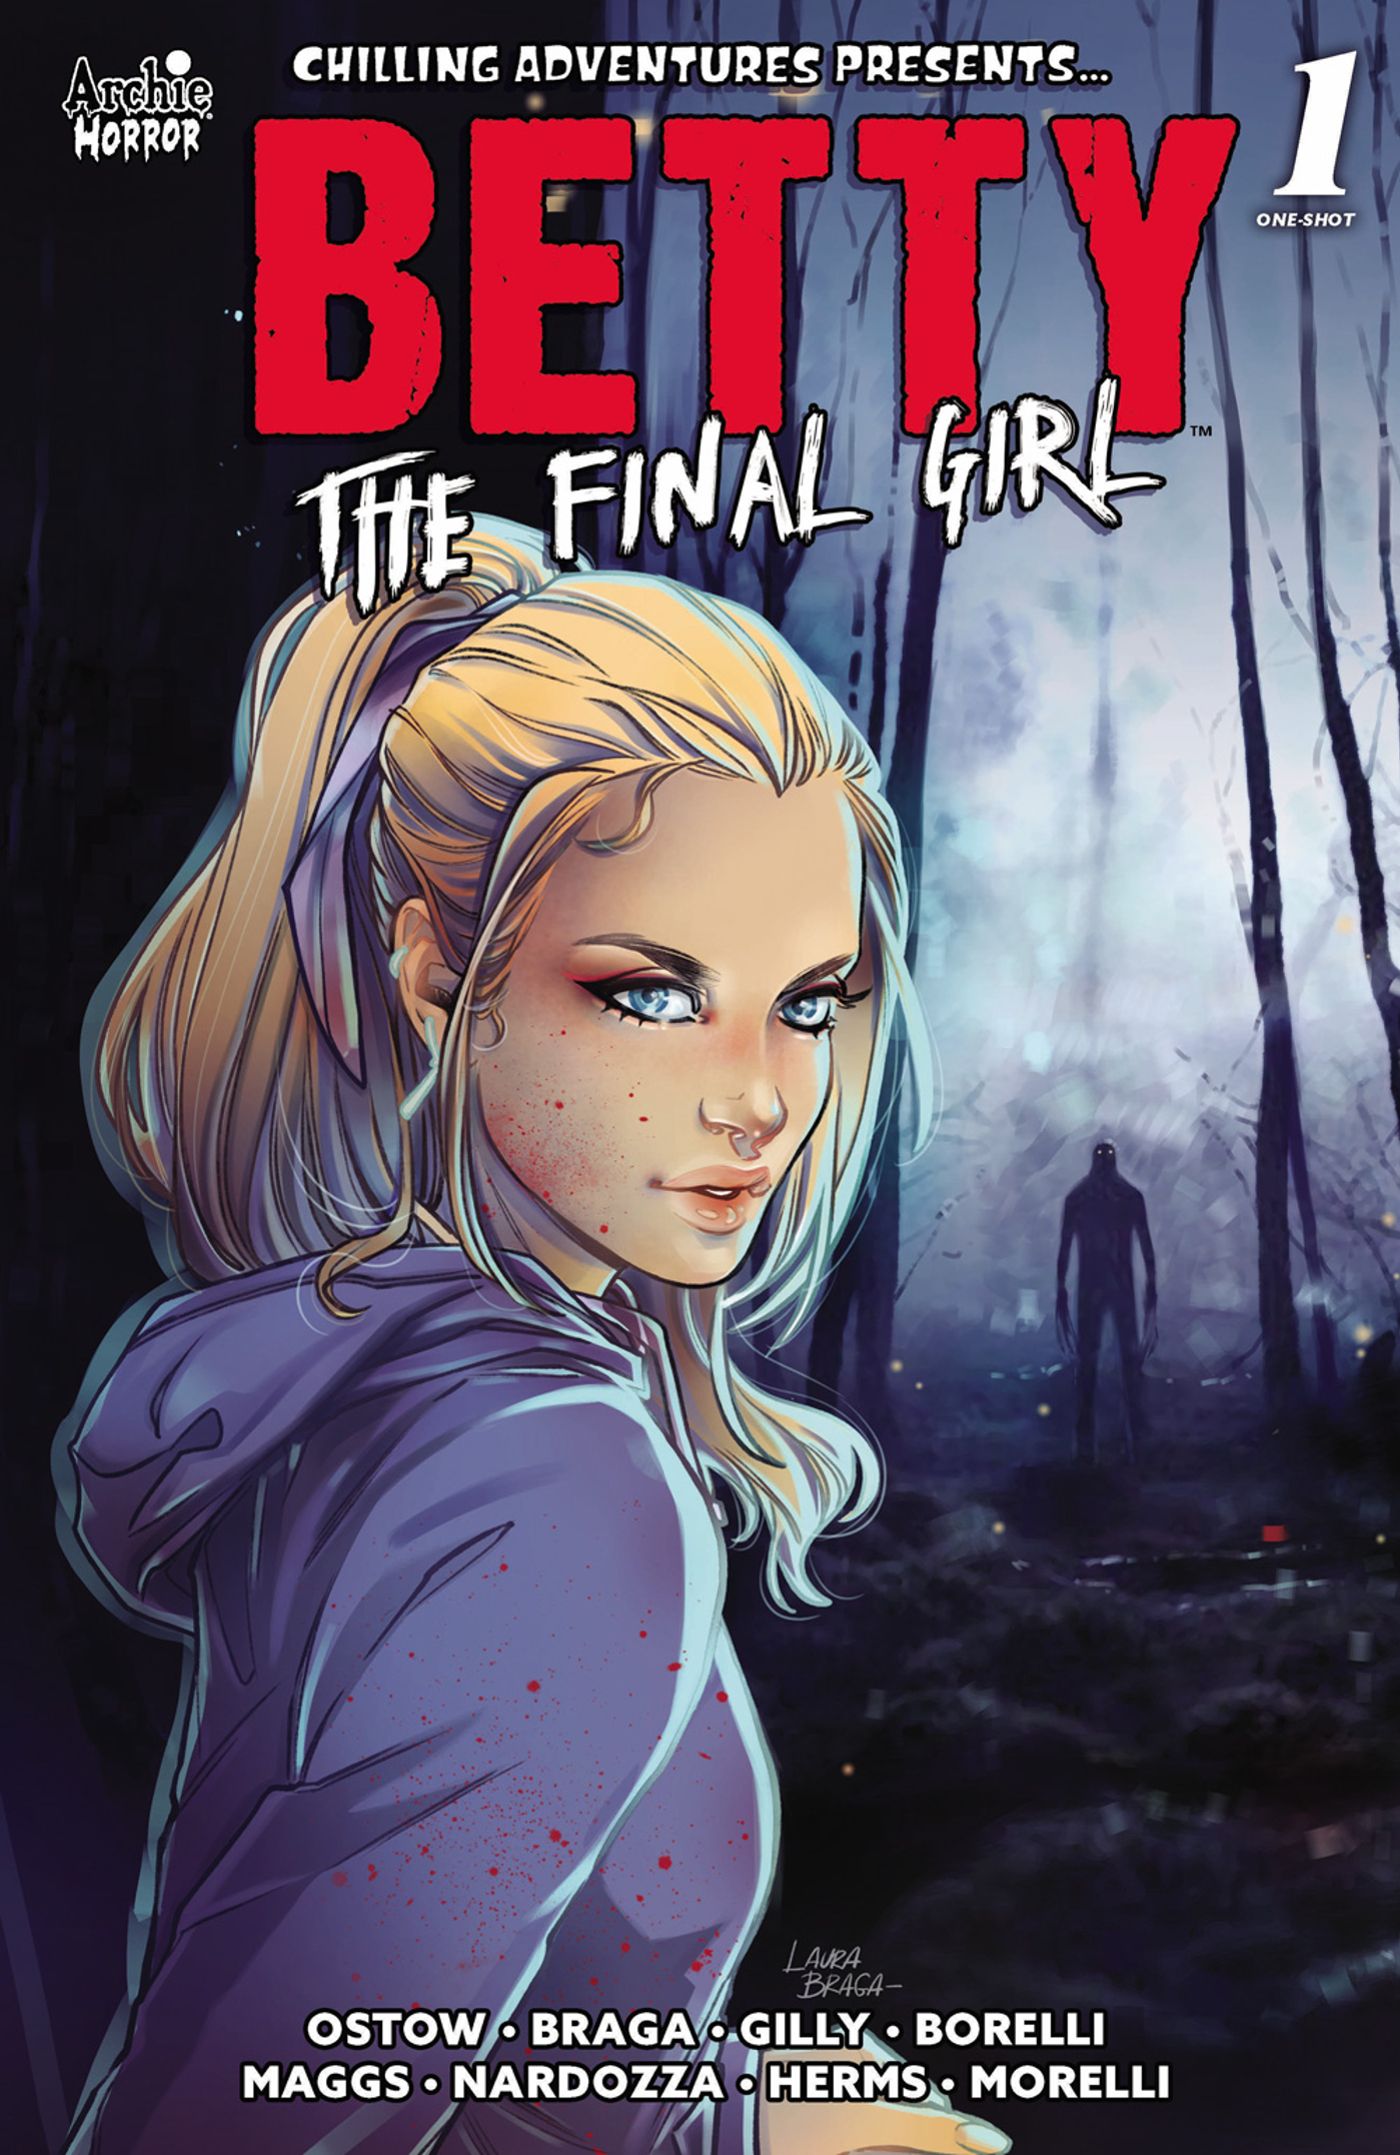 chilling adventures presents betty the final girl 1 a